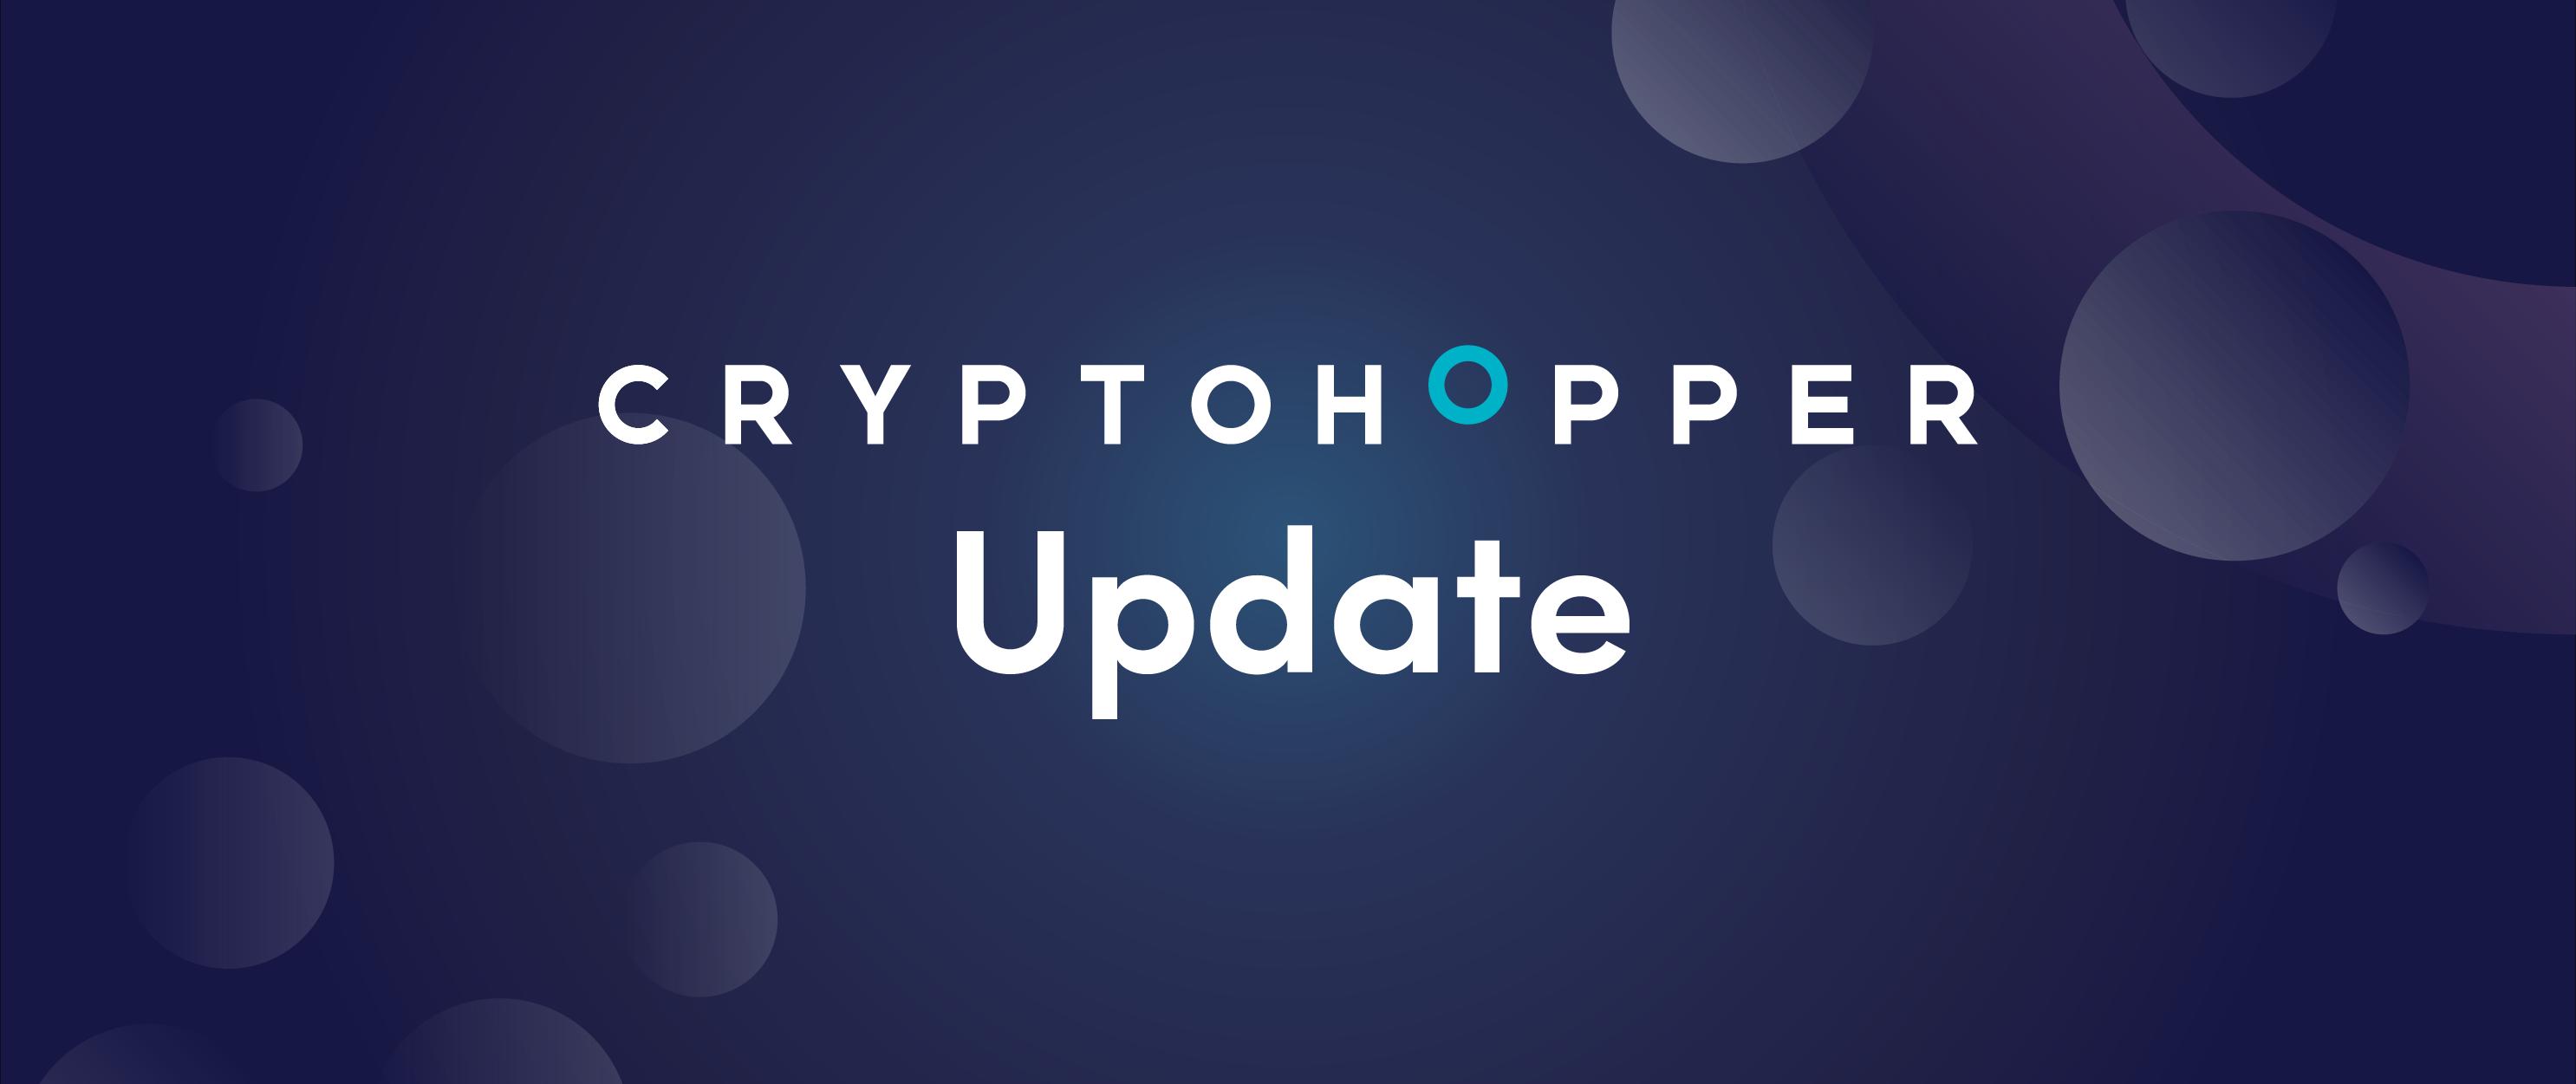 Coindicator and Cryptogrower added to Cryptohopper